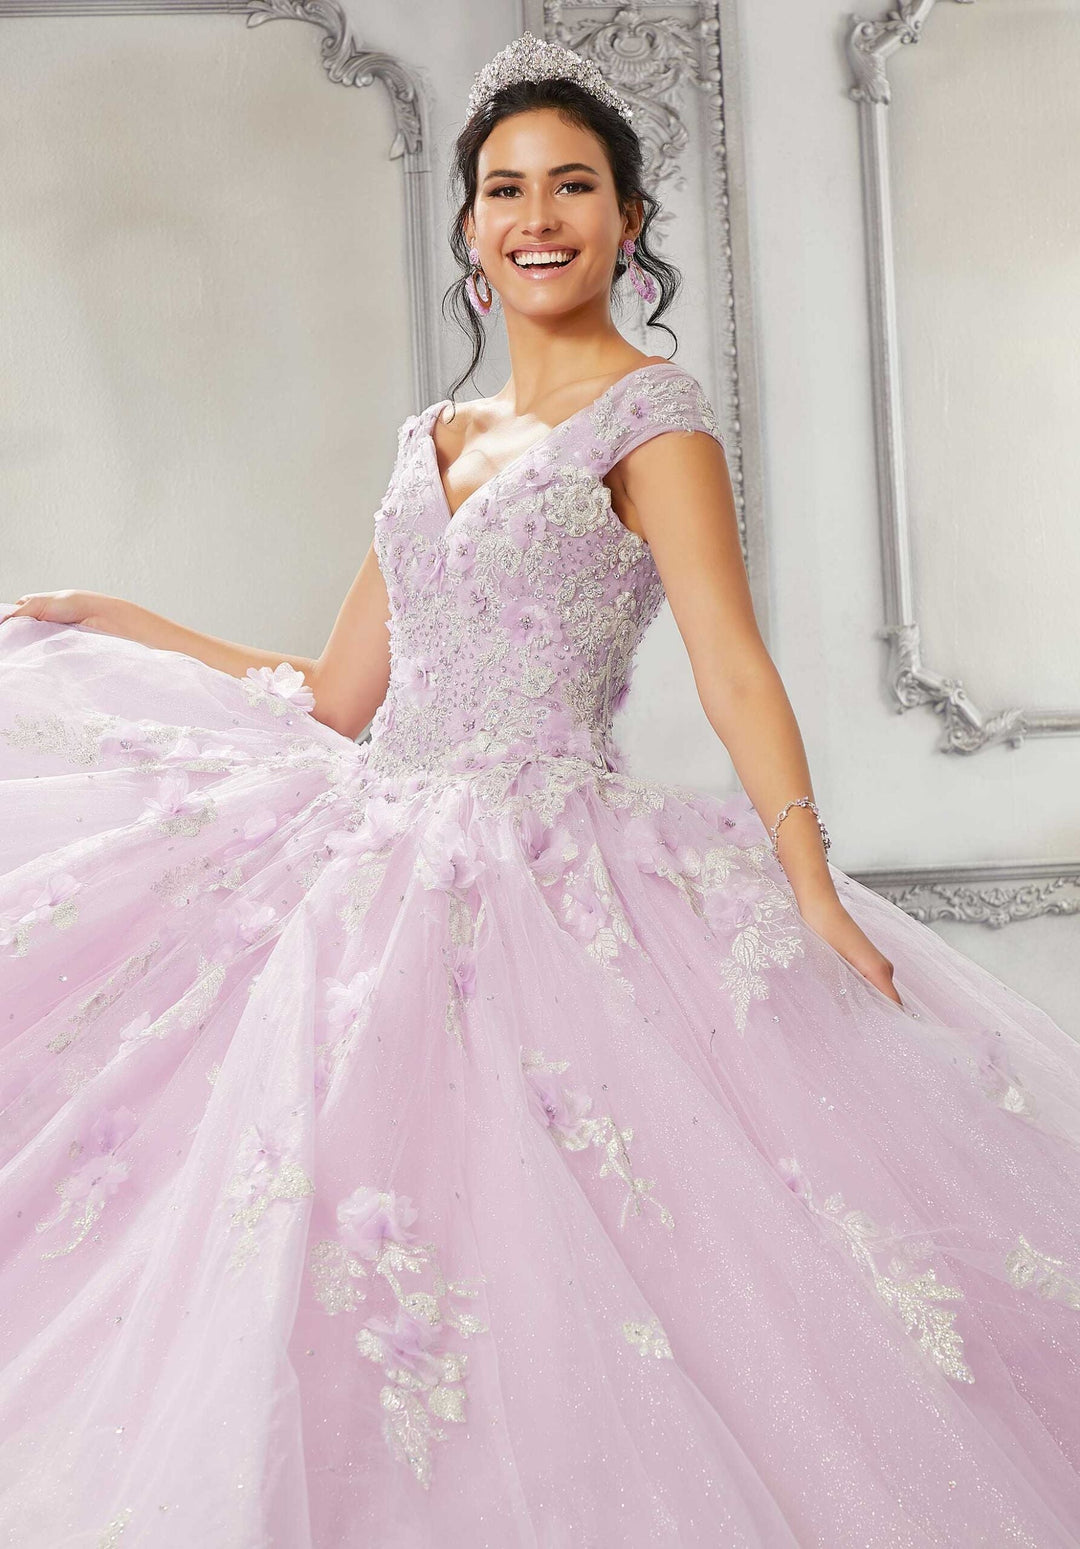 Crystal Beaded Three-Dimensional Floral Quinceañera Dress  #89316